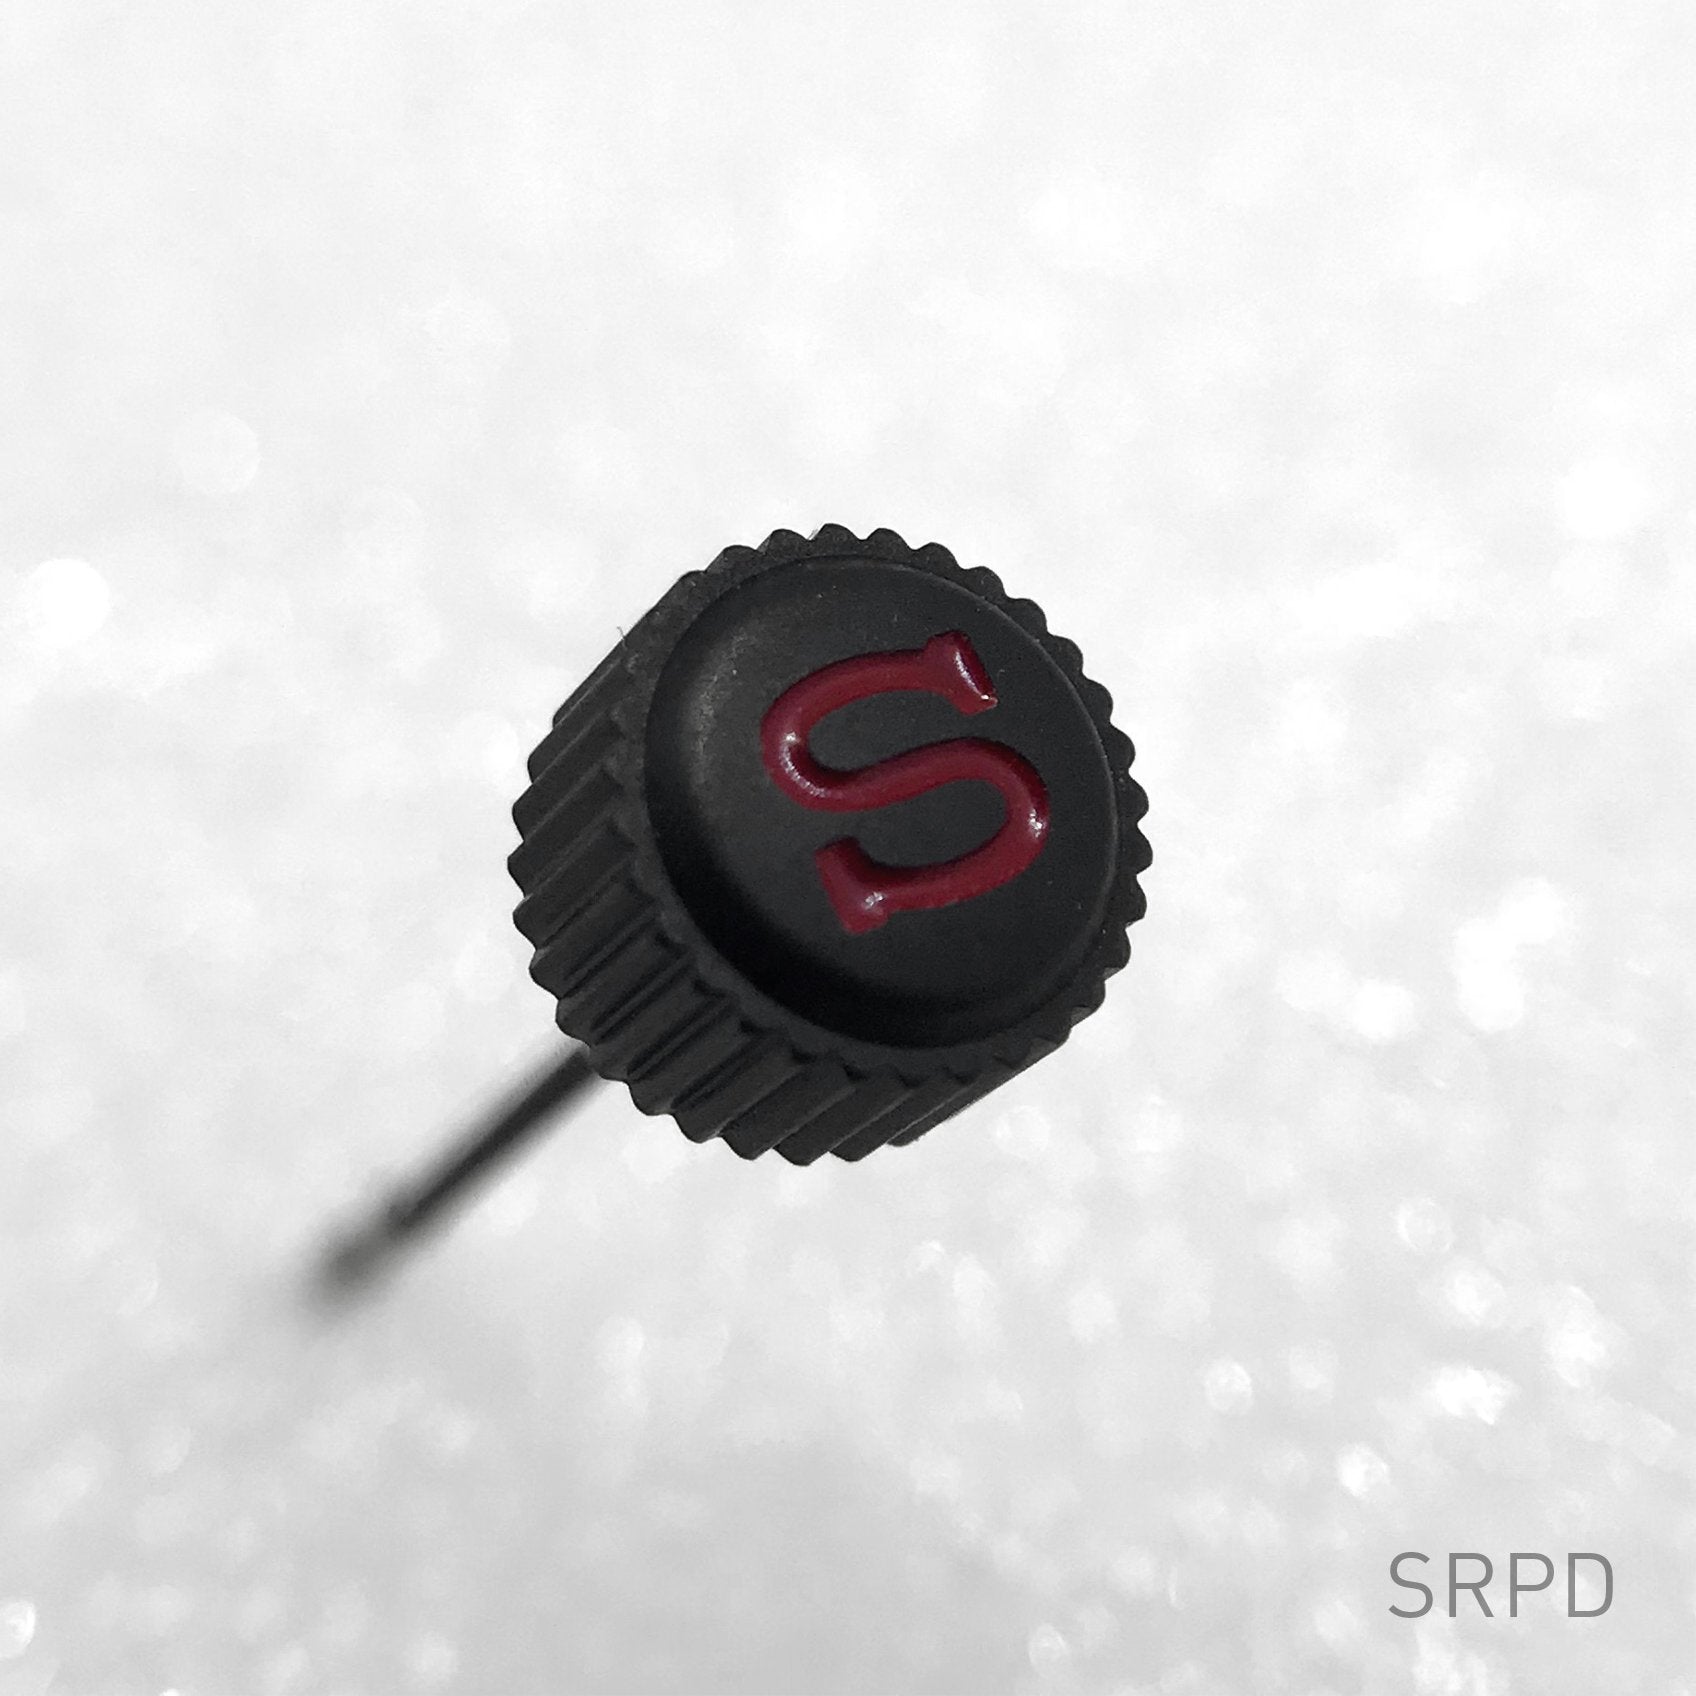 Crown - SRPD - Bead Blasted PVD Black - Red "S"